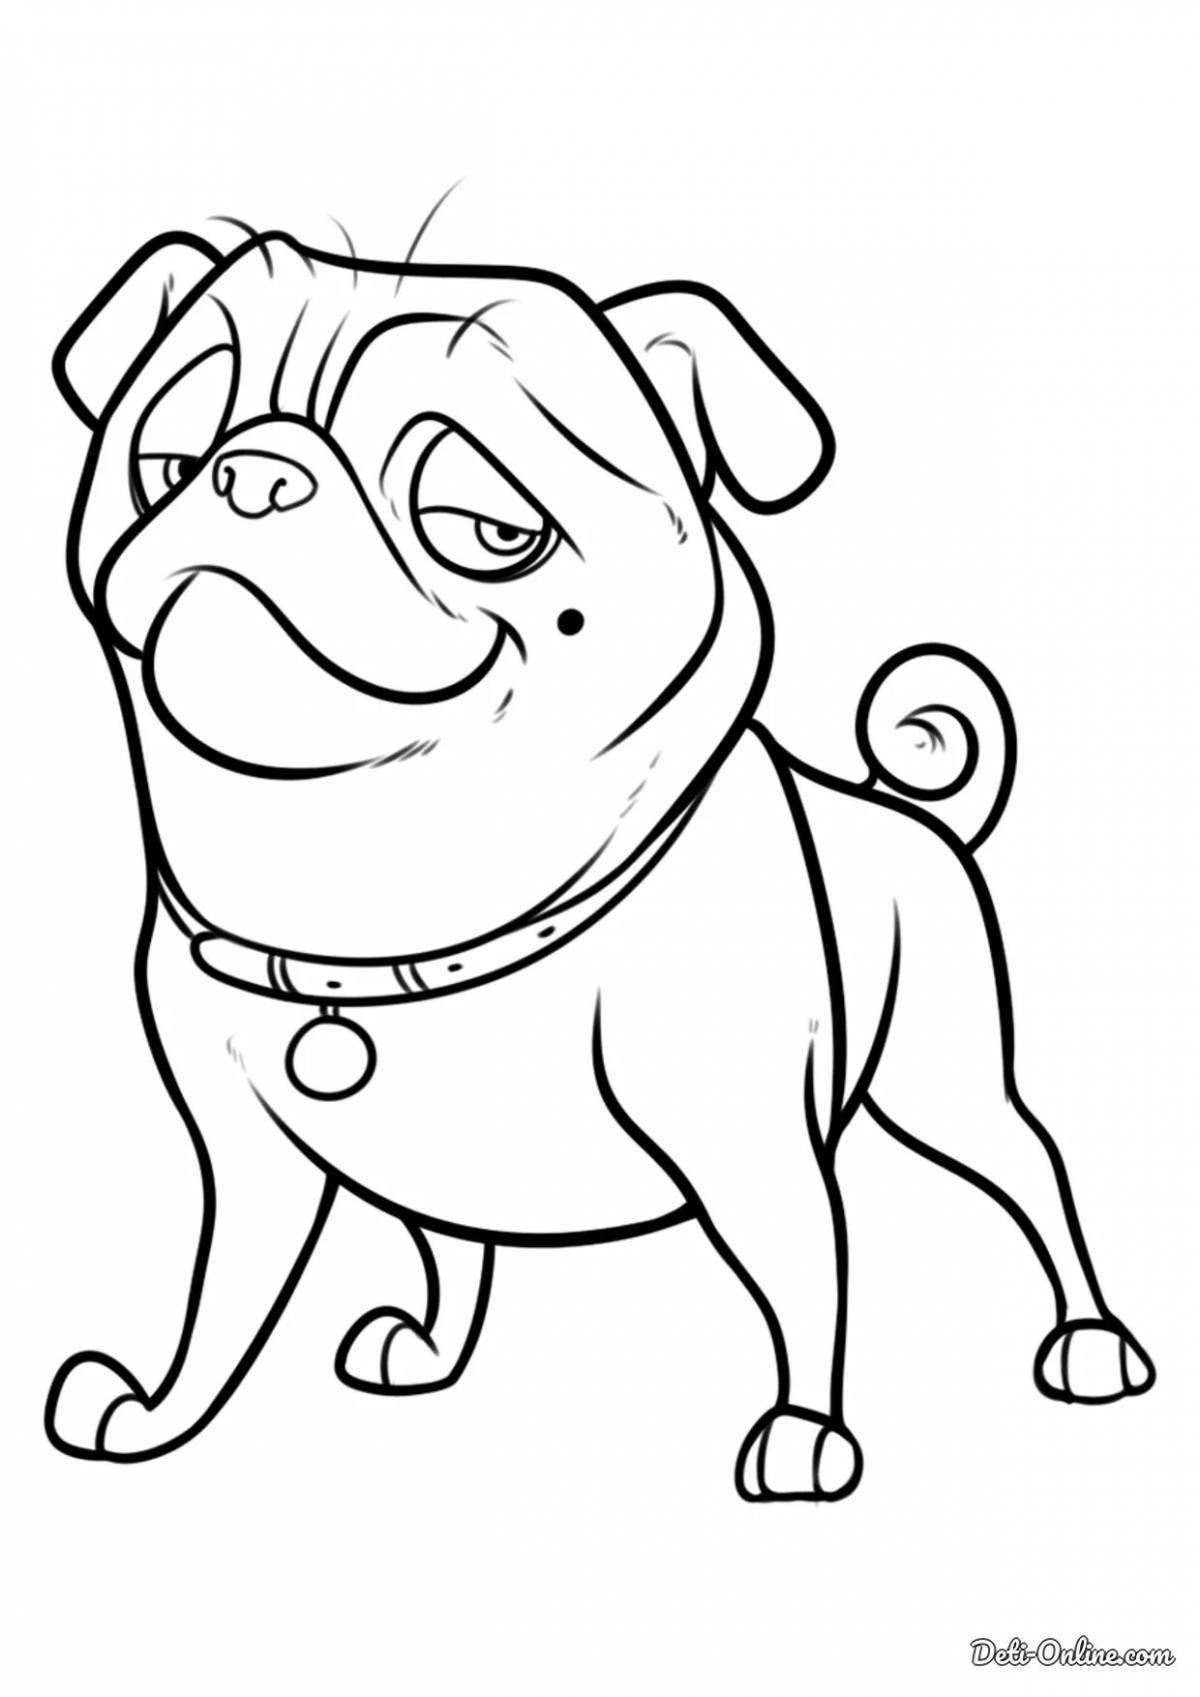 Coloring page witty pug